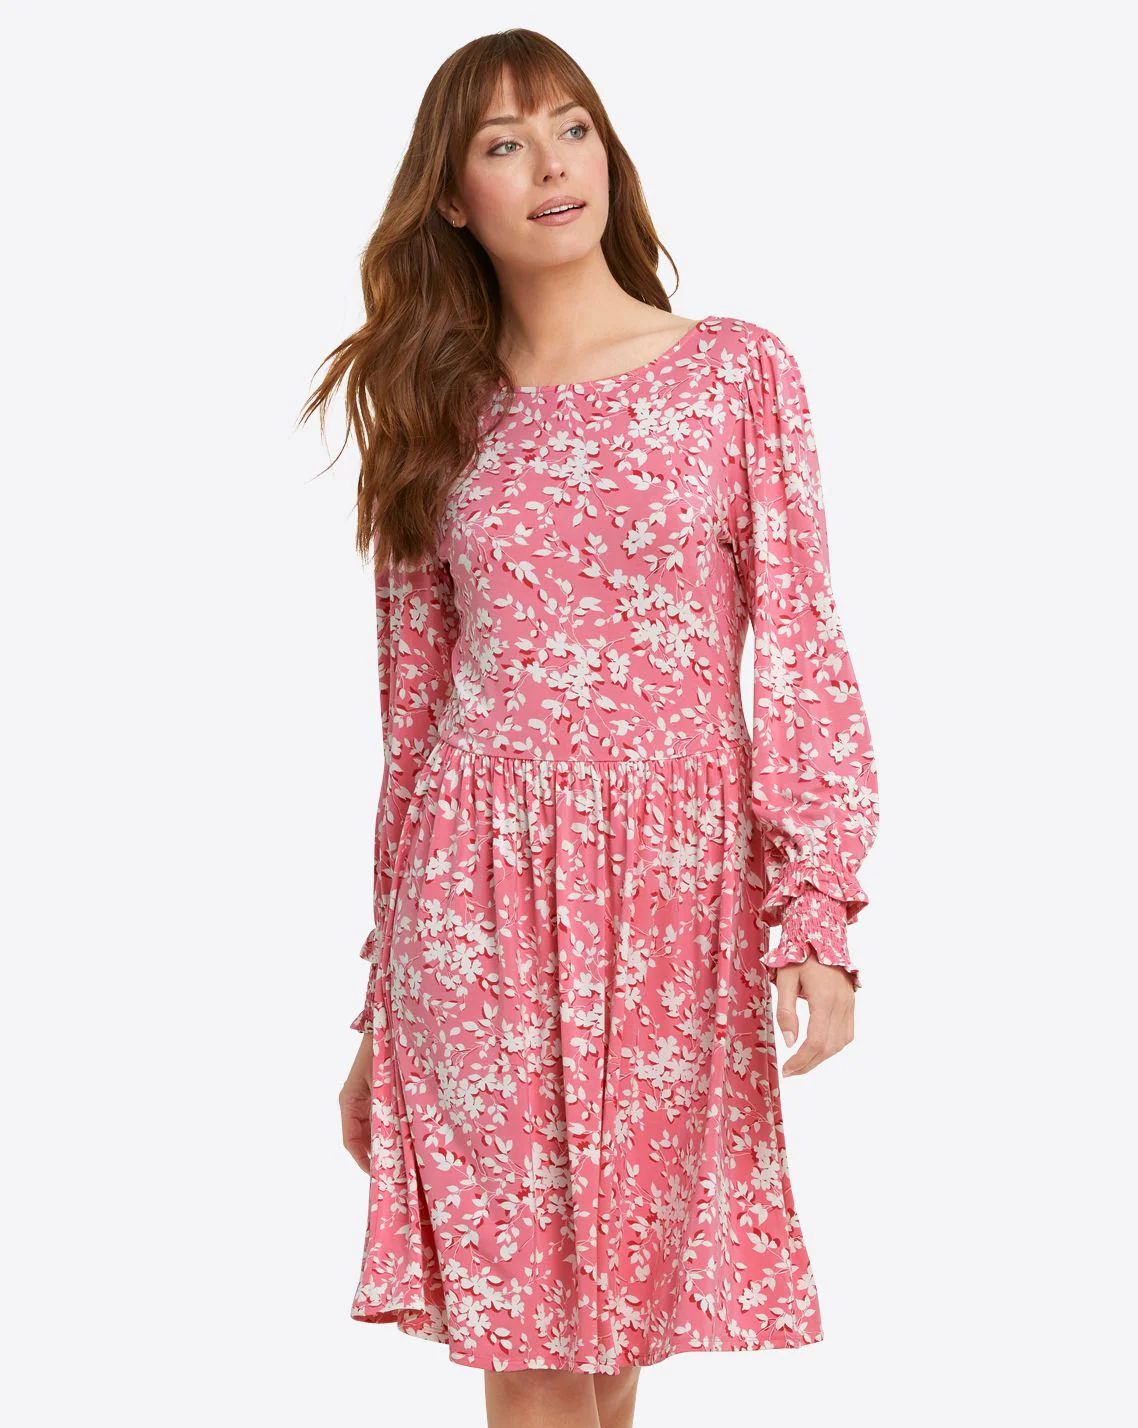 Boatneck Kitty Dress in Pink Shadow Floral | Draper James (US)